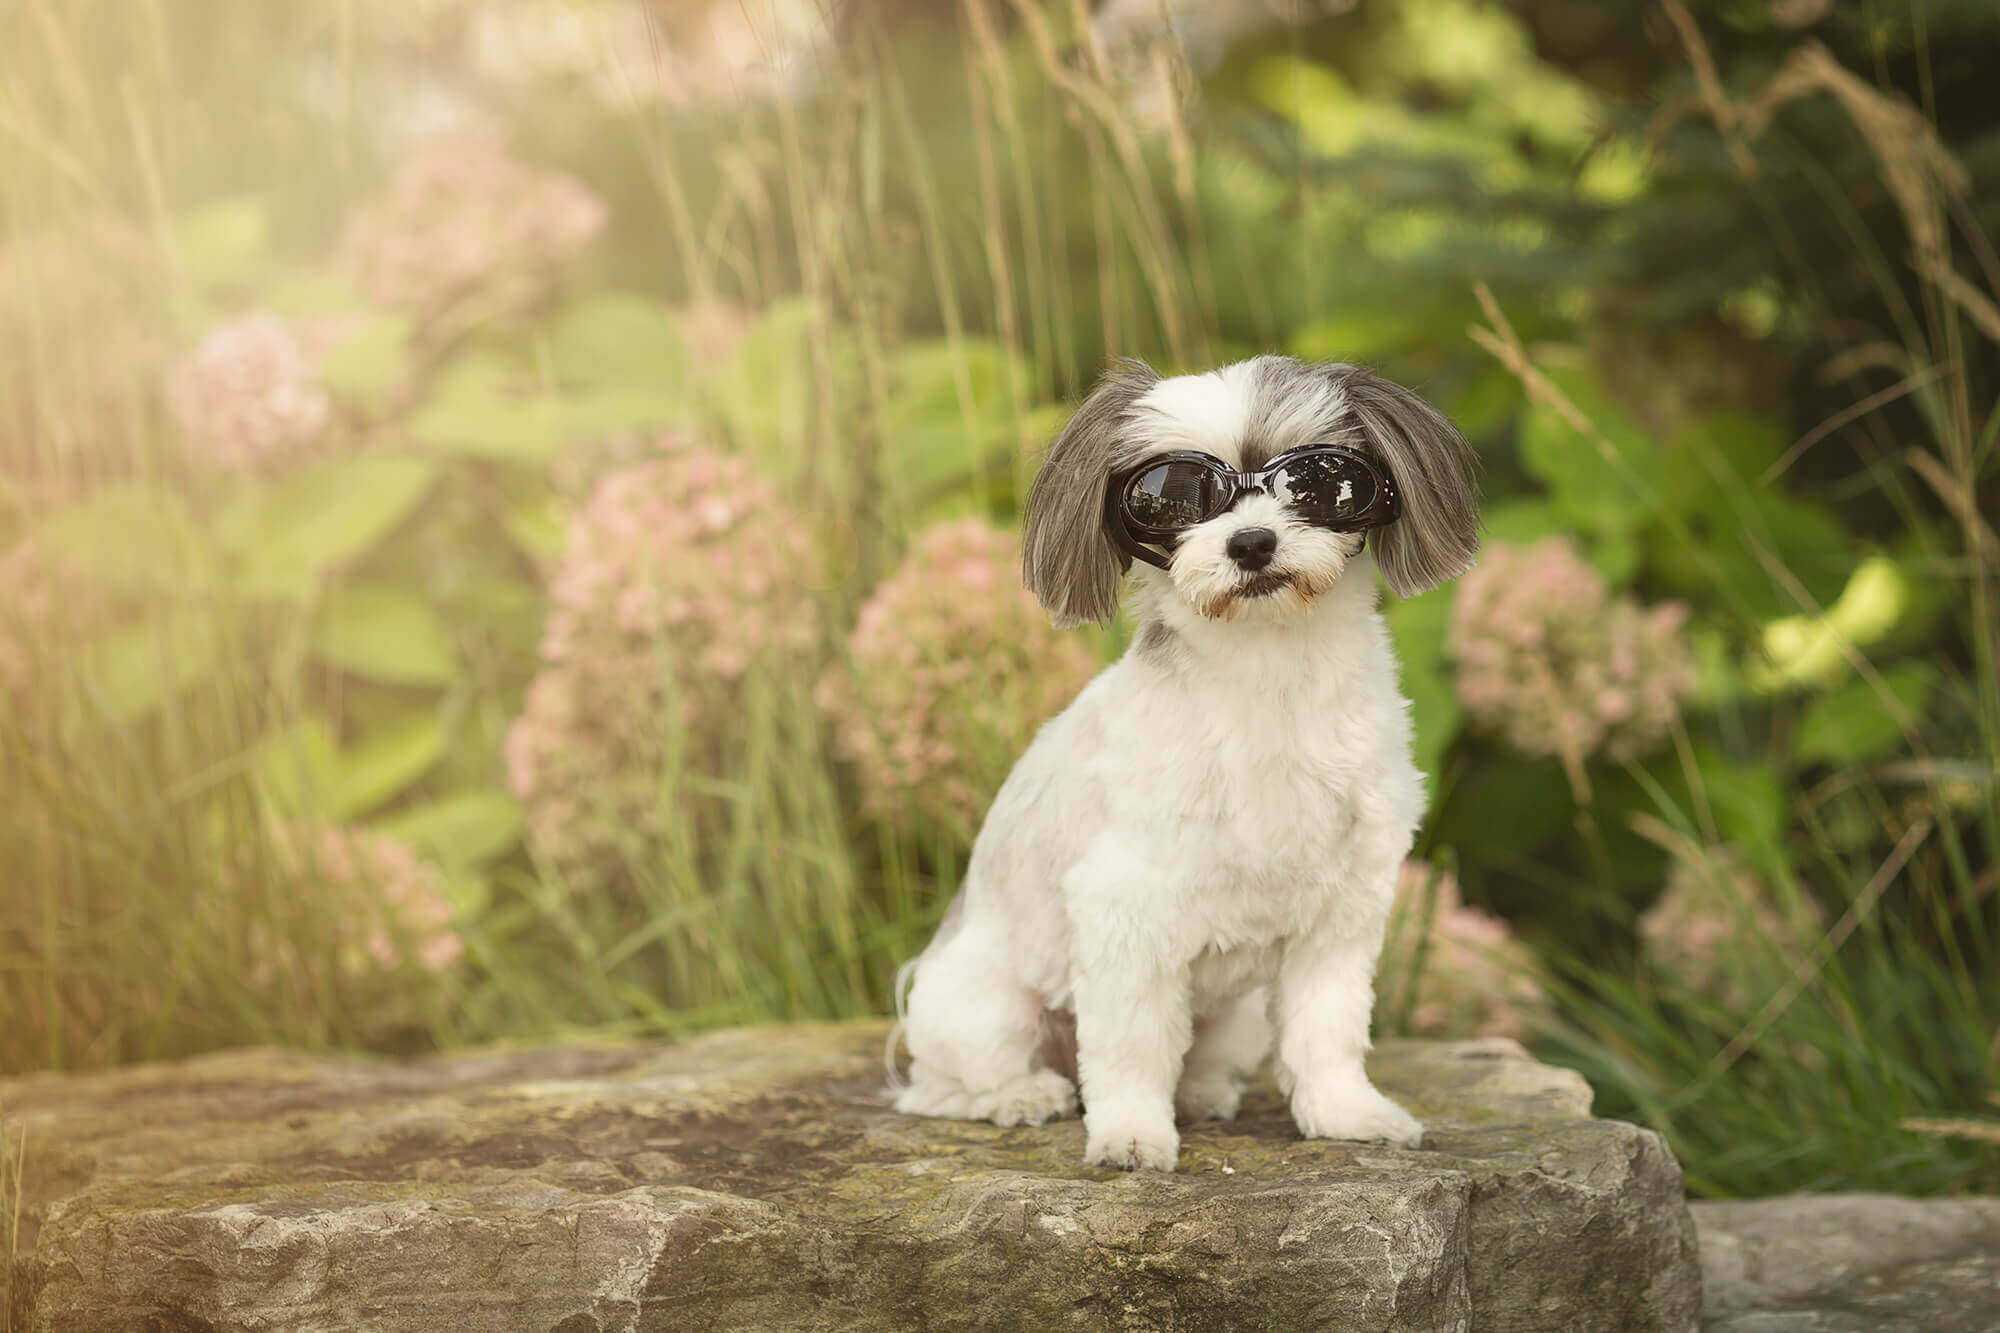 dog with sunglasses sitting in garden